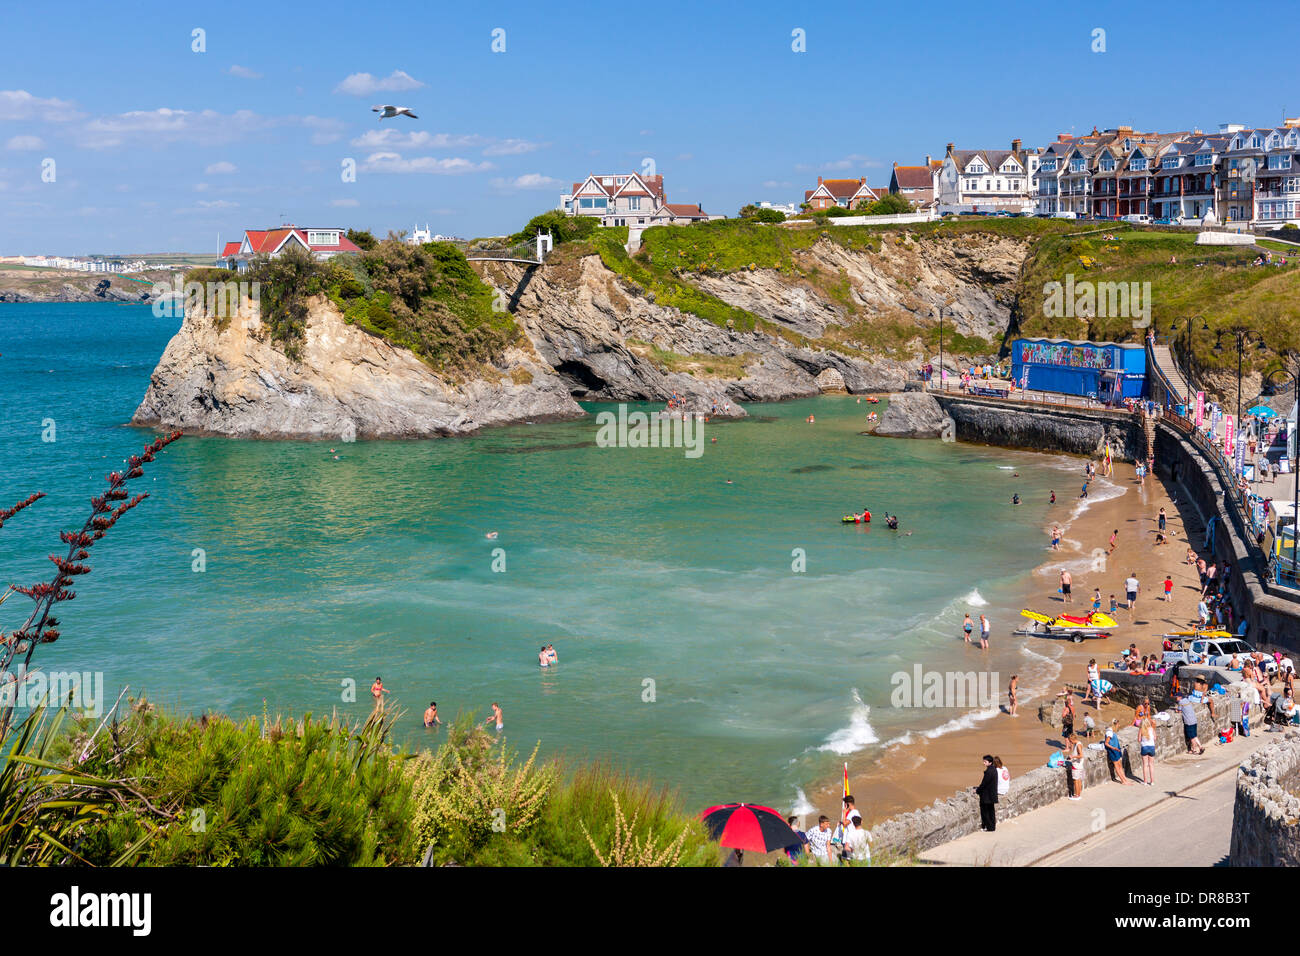 Plage de Towan, Newquay, Cornwall, Angleterre, Royaume-Uni, Europe. Banque D'Images